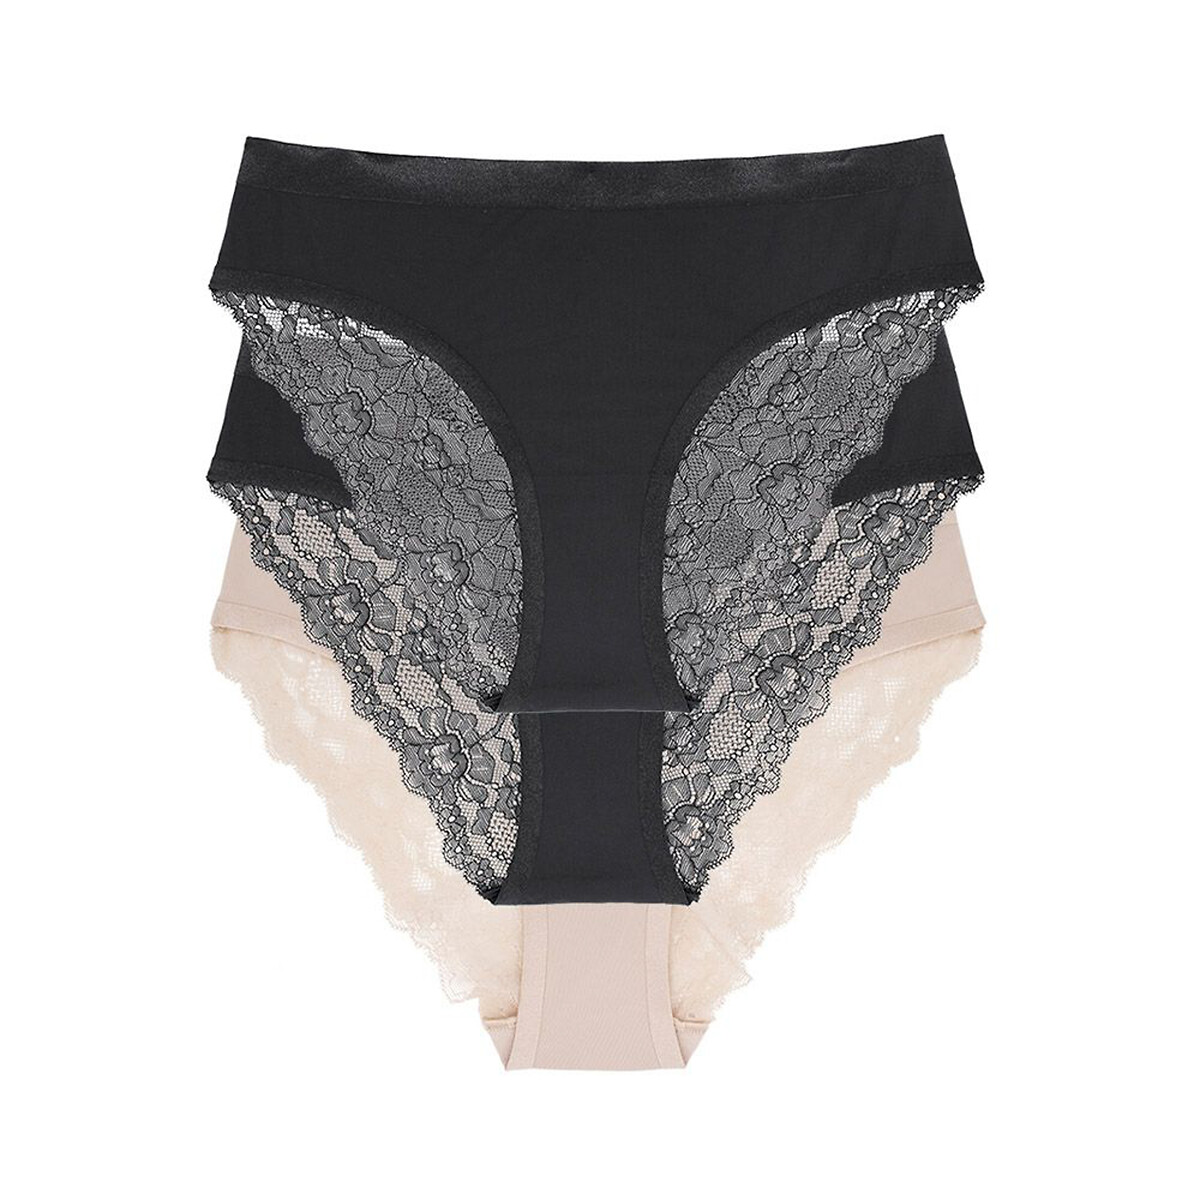 Pack of 3 Crystal Knickers